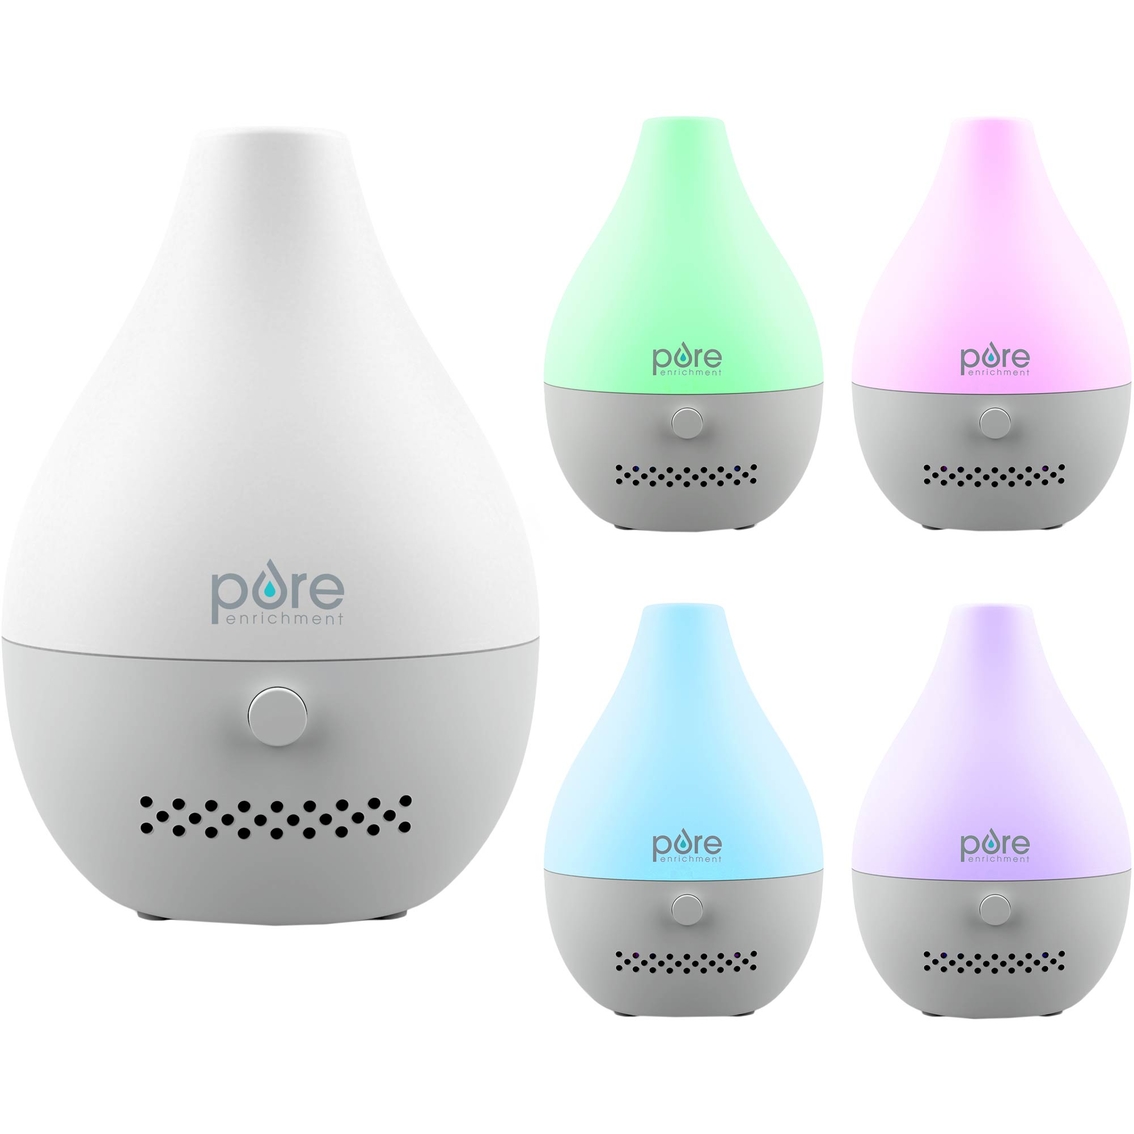 USB Colorful Humidifier (Aromatherapy Diffuser) – Massage